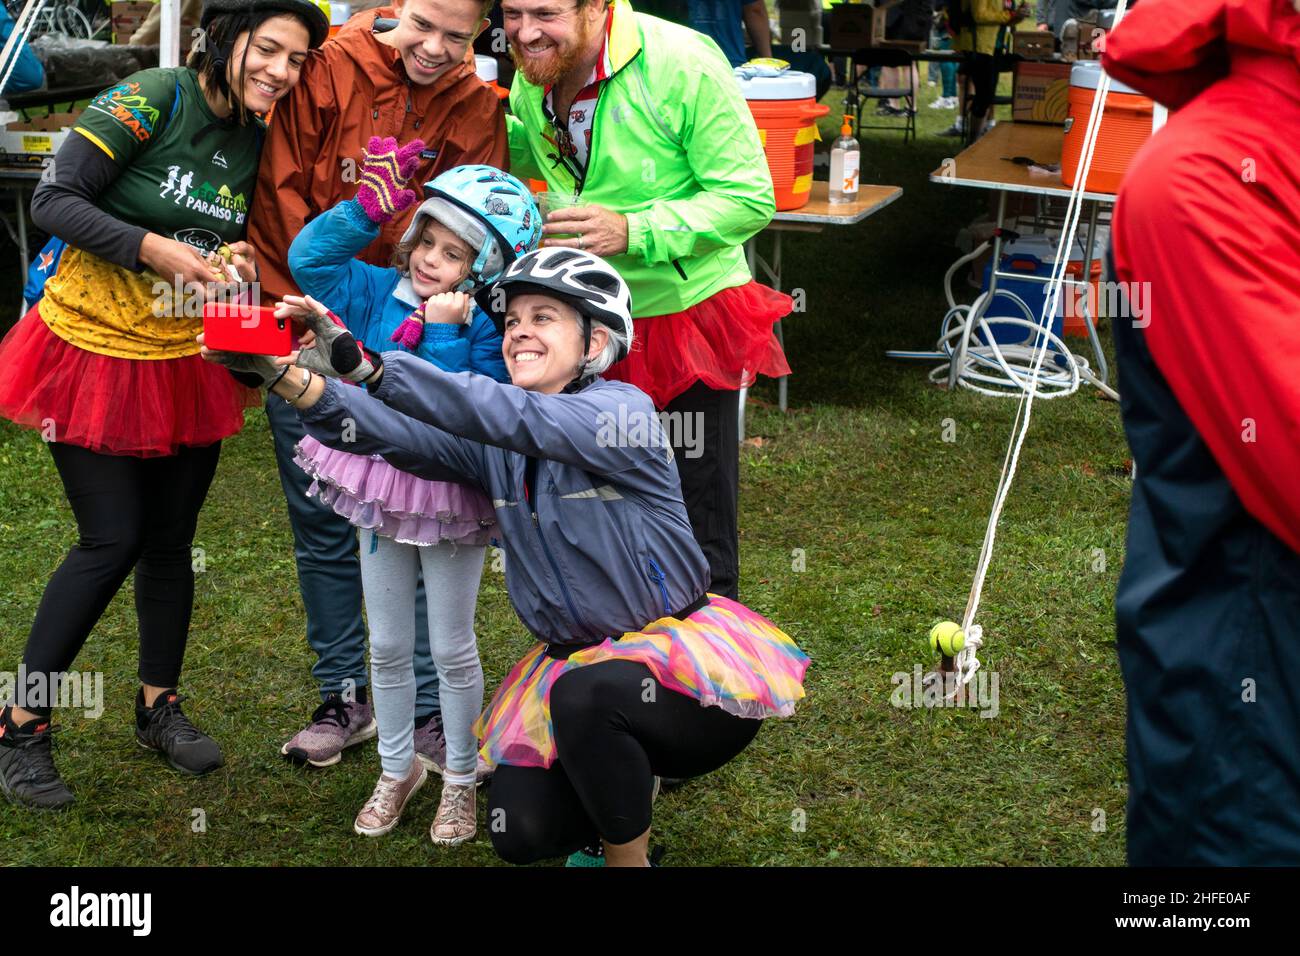 Family dressed in tutu skirts taking selfie before riding in the St. Paul Classic Bike Tour 2019. St Paul Minnesota MN USA Stock Photo